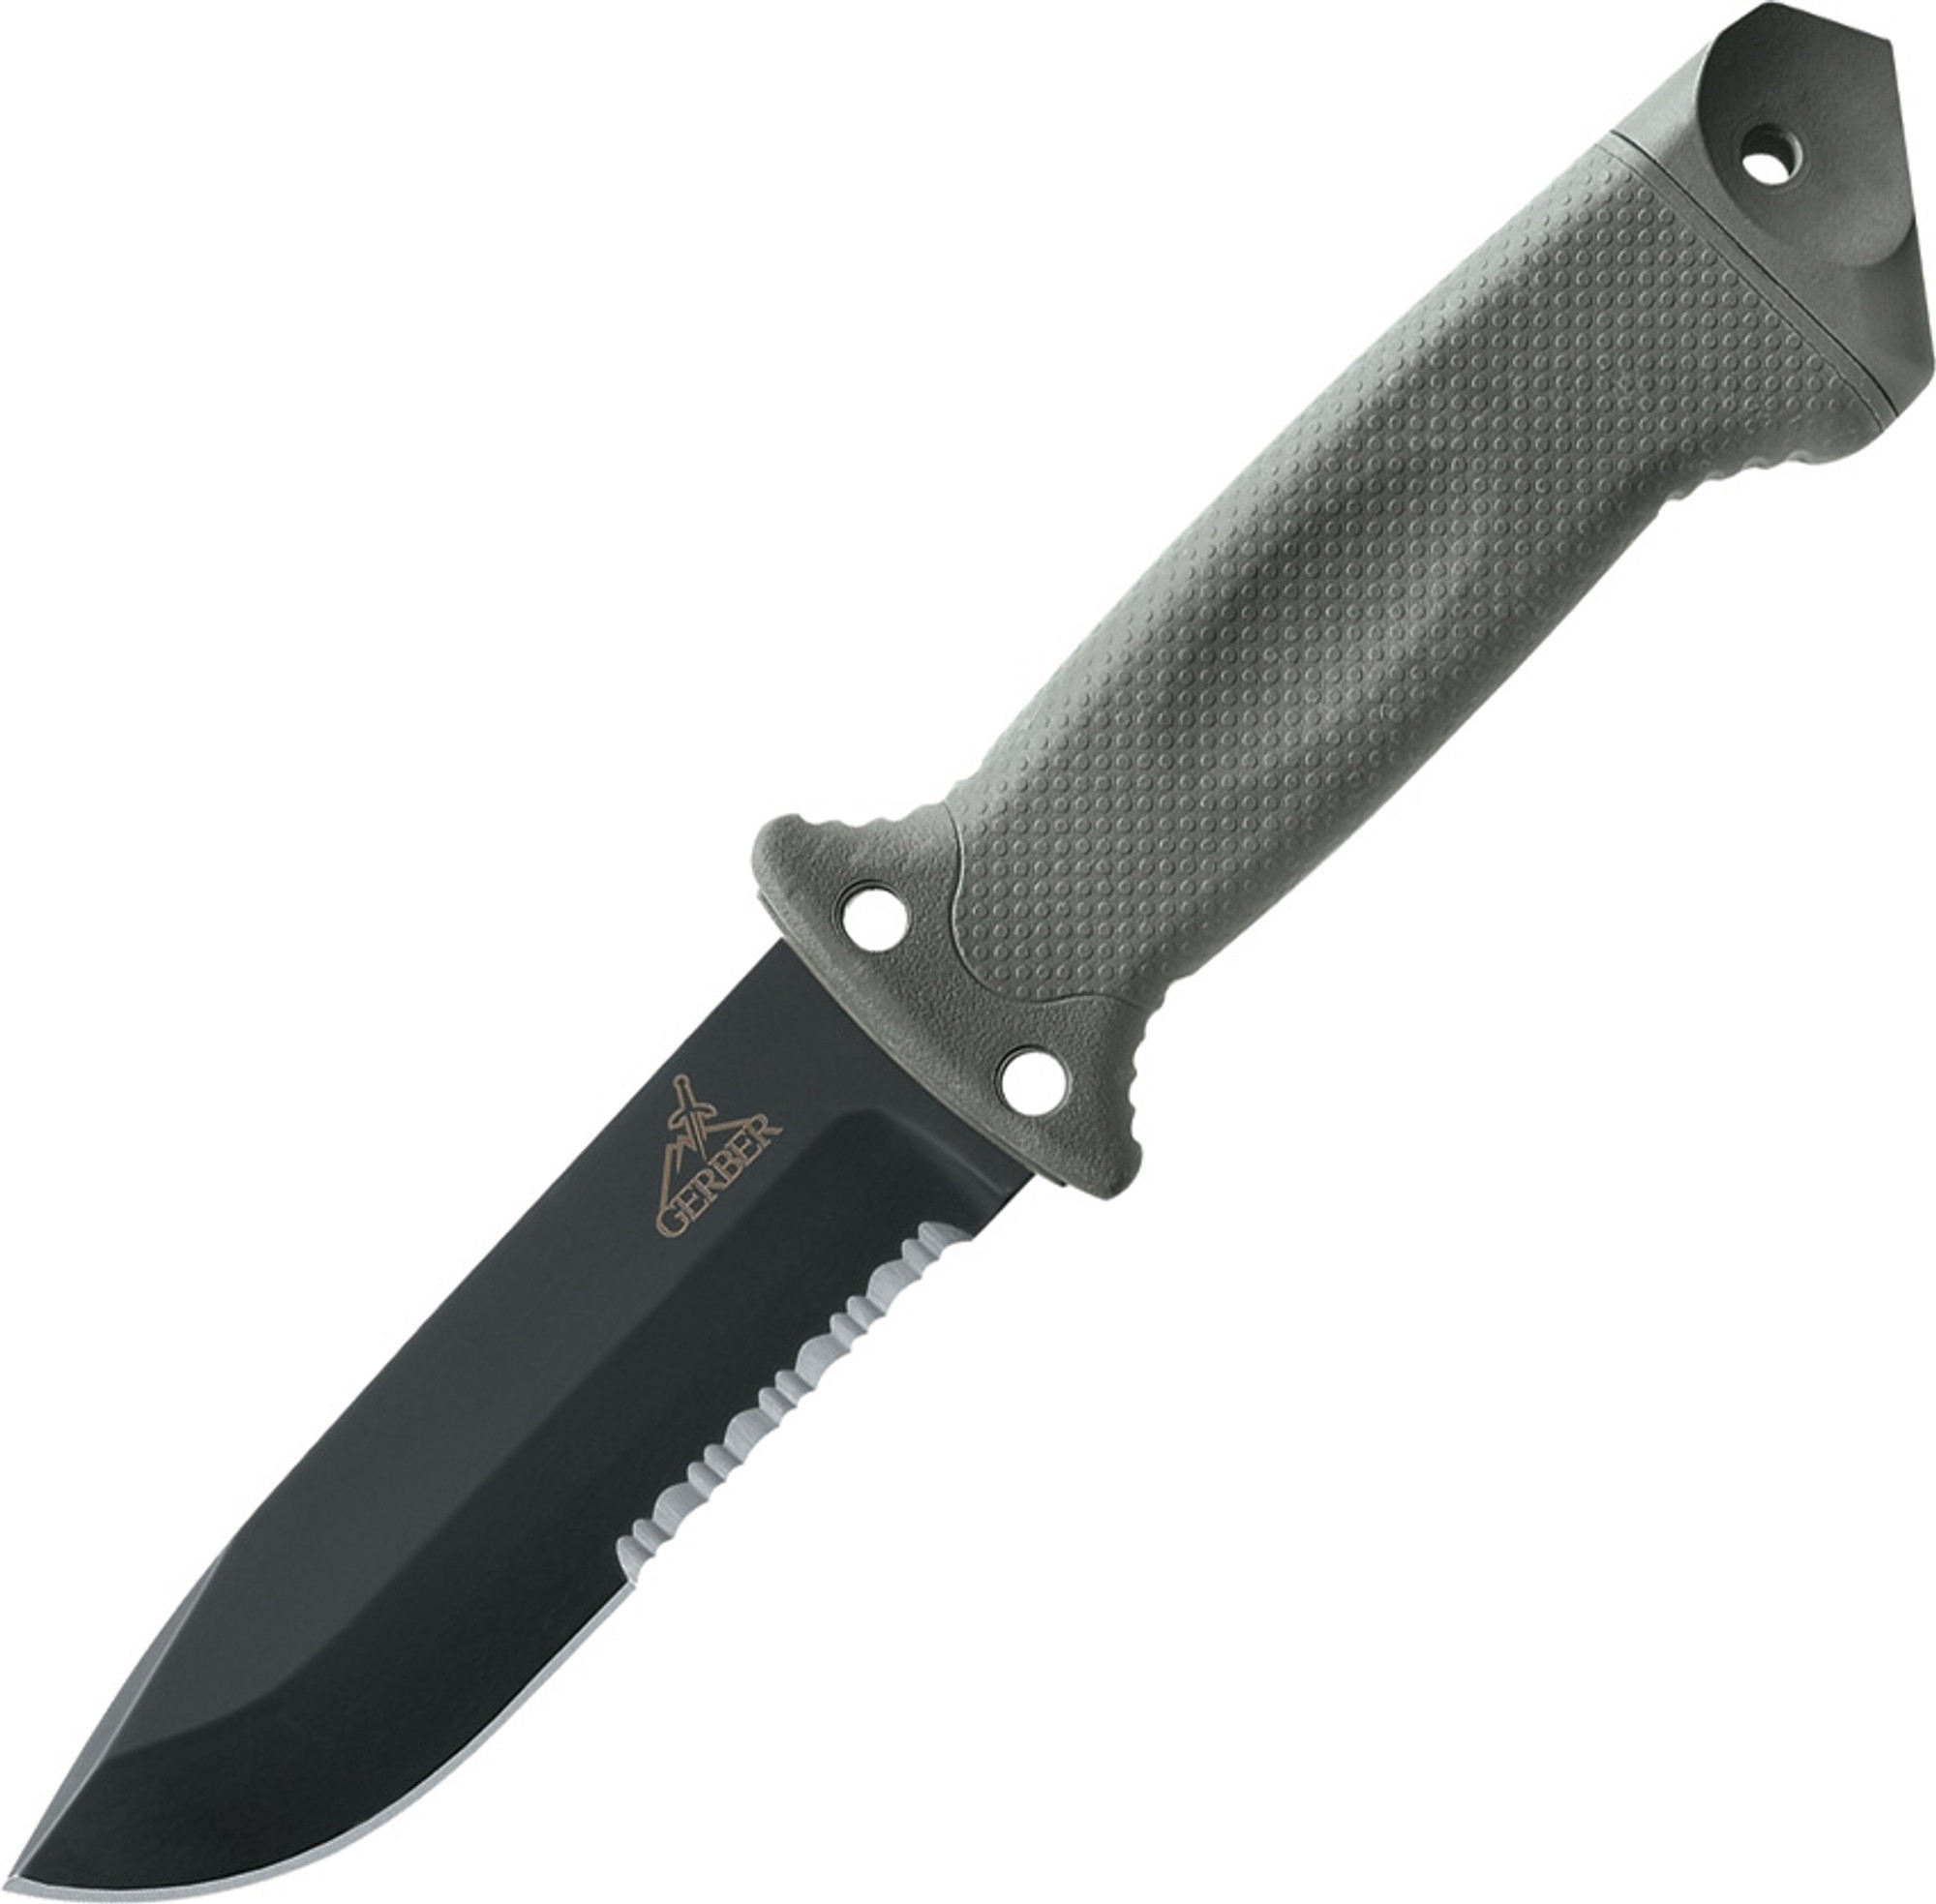 Gerber LMF II Infantry Fixed Blade - Foliage Green